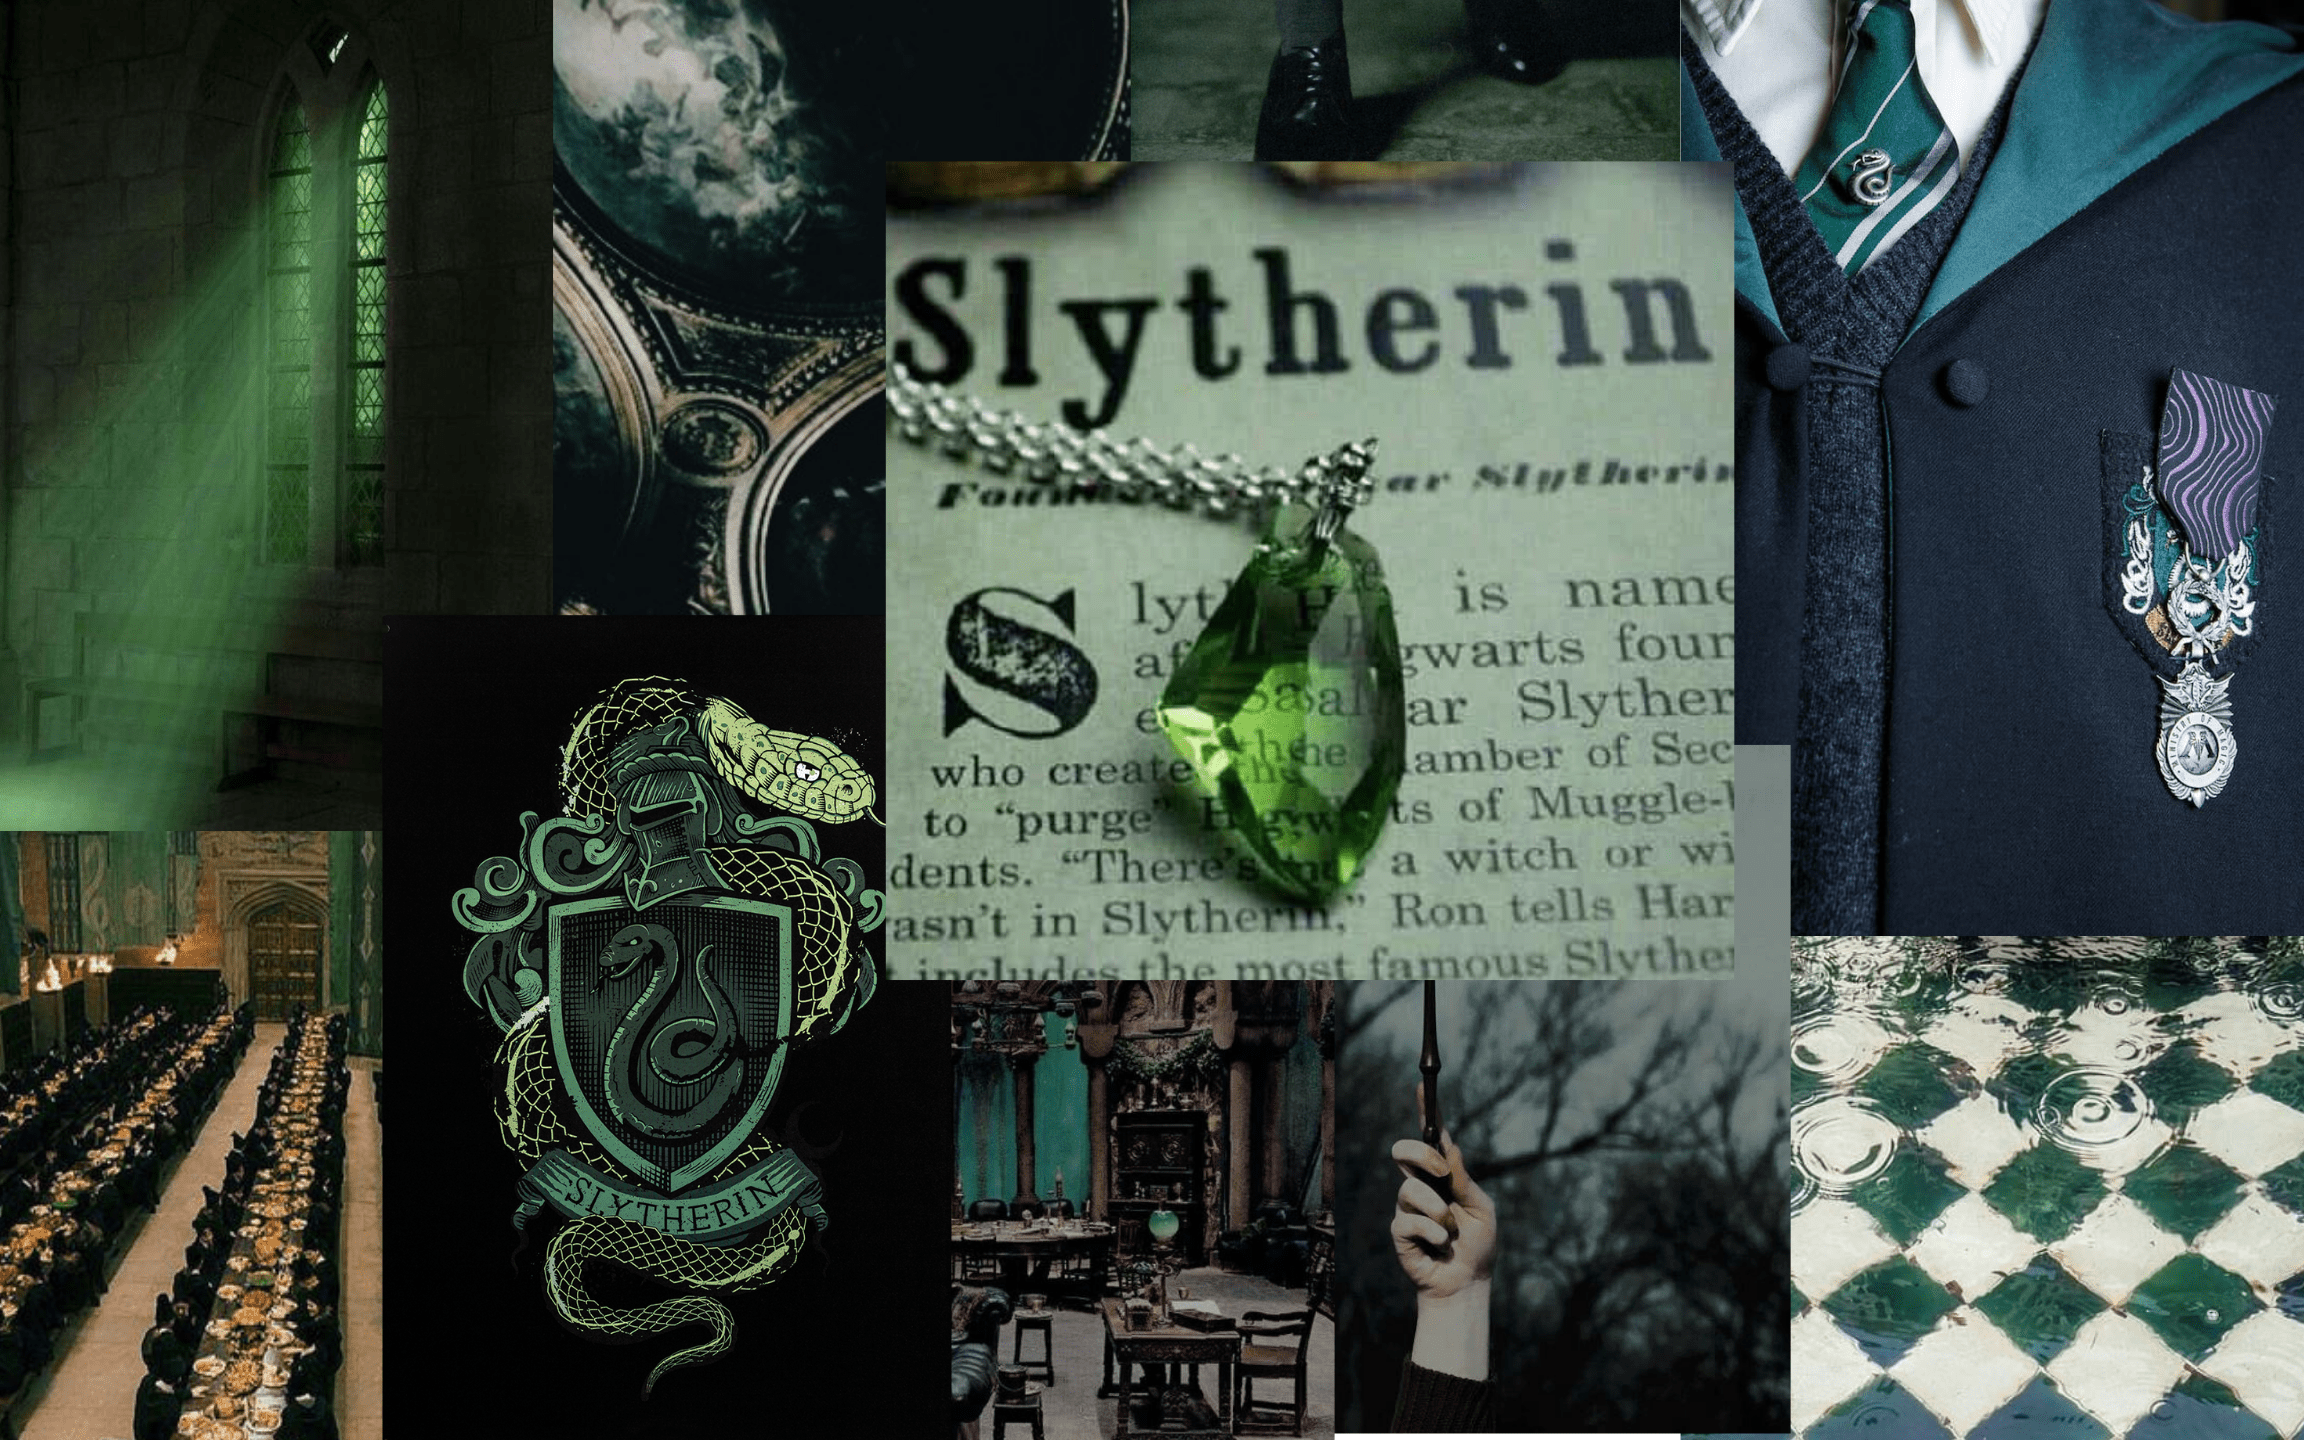 A collage of Slytherin related items such as the house crest, the snake, and a necklace. - Slytherin